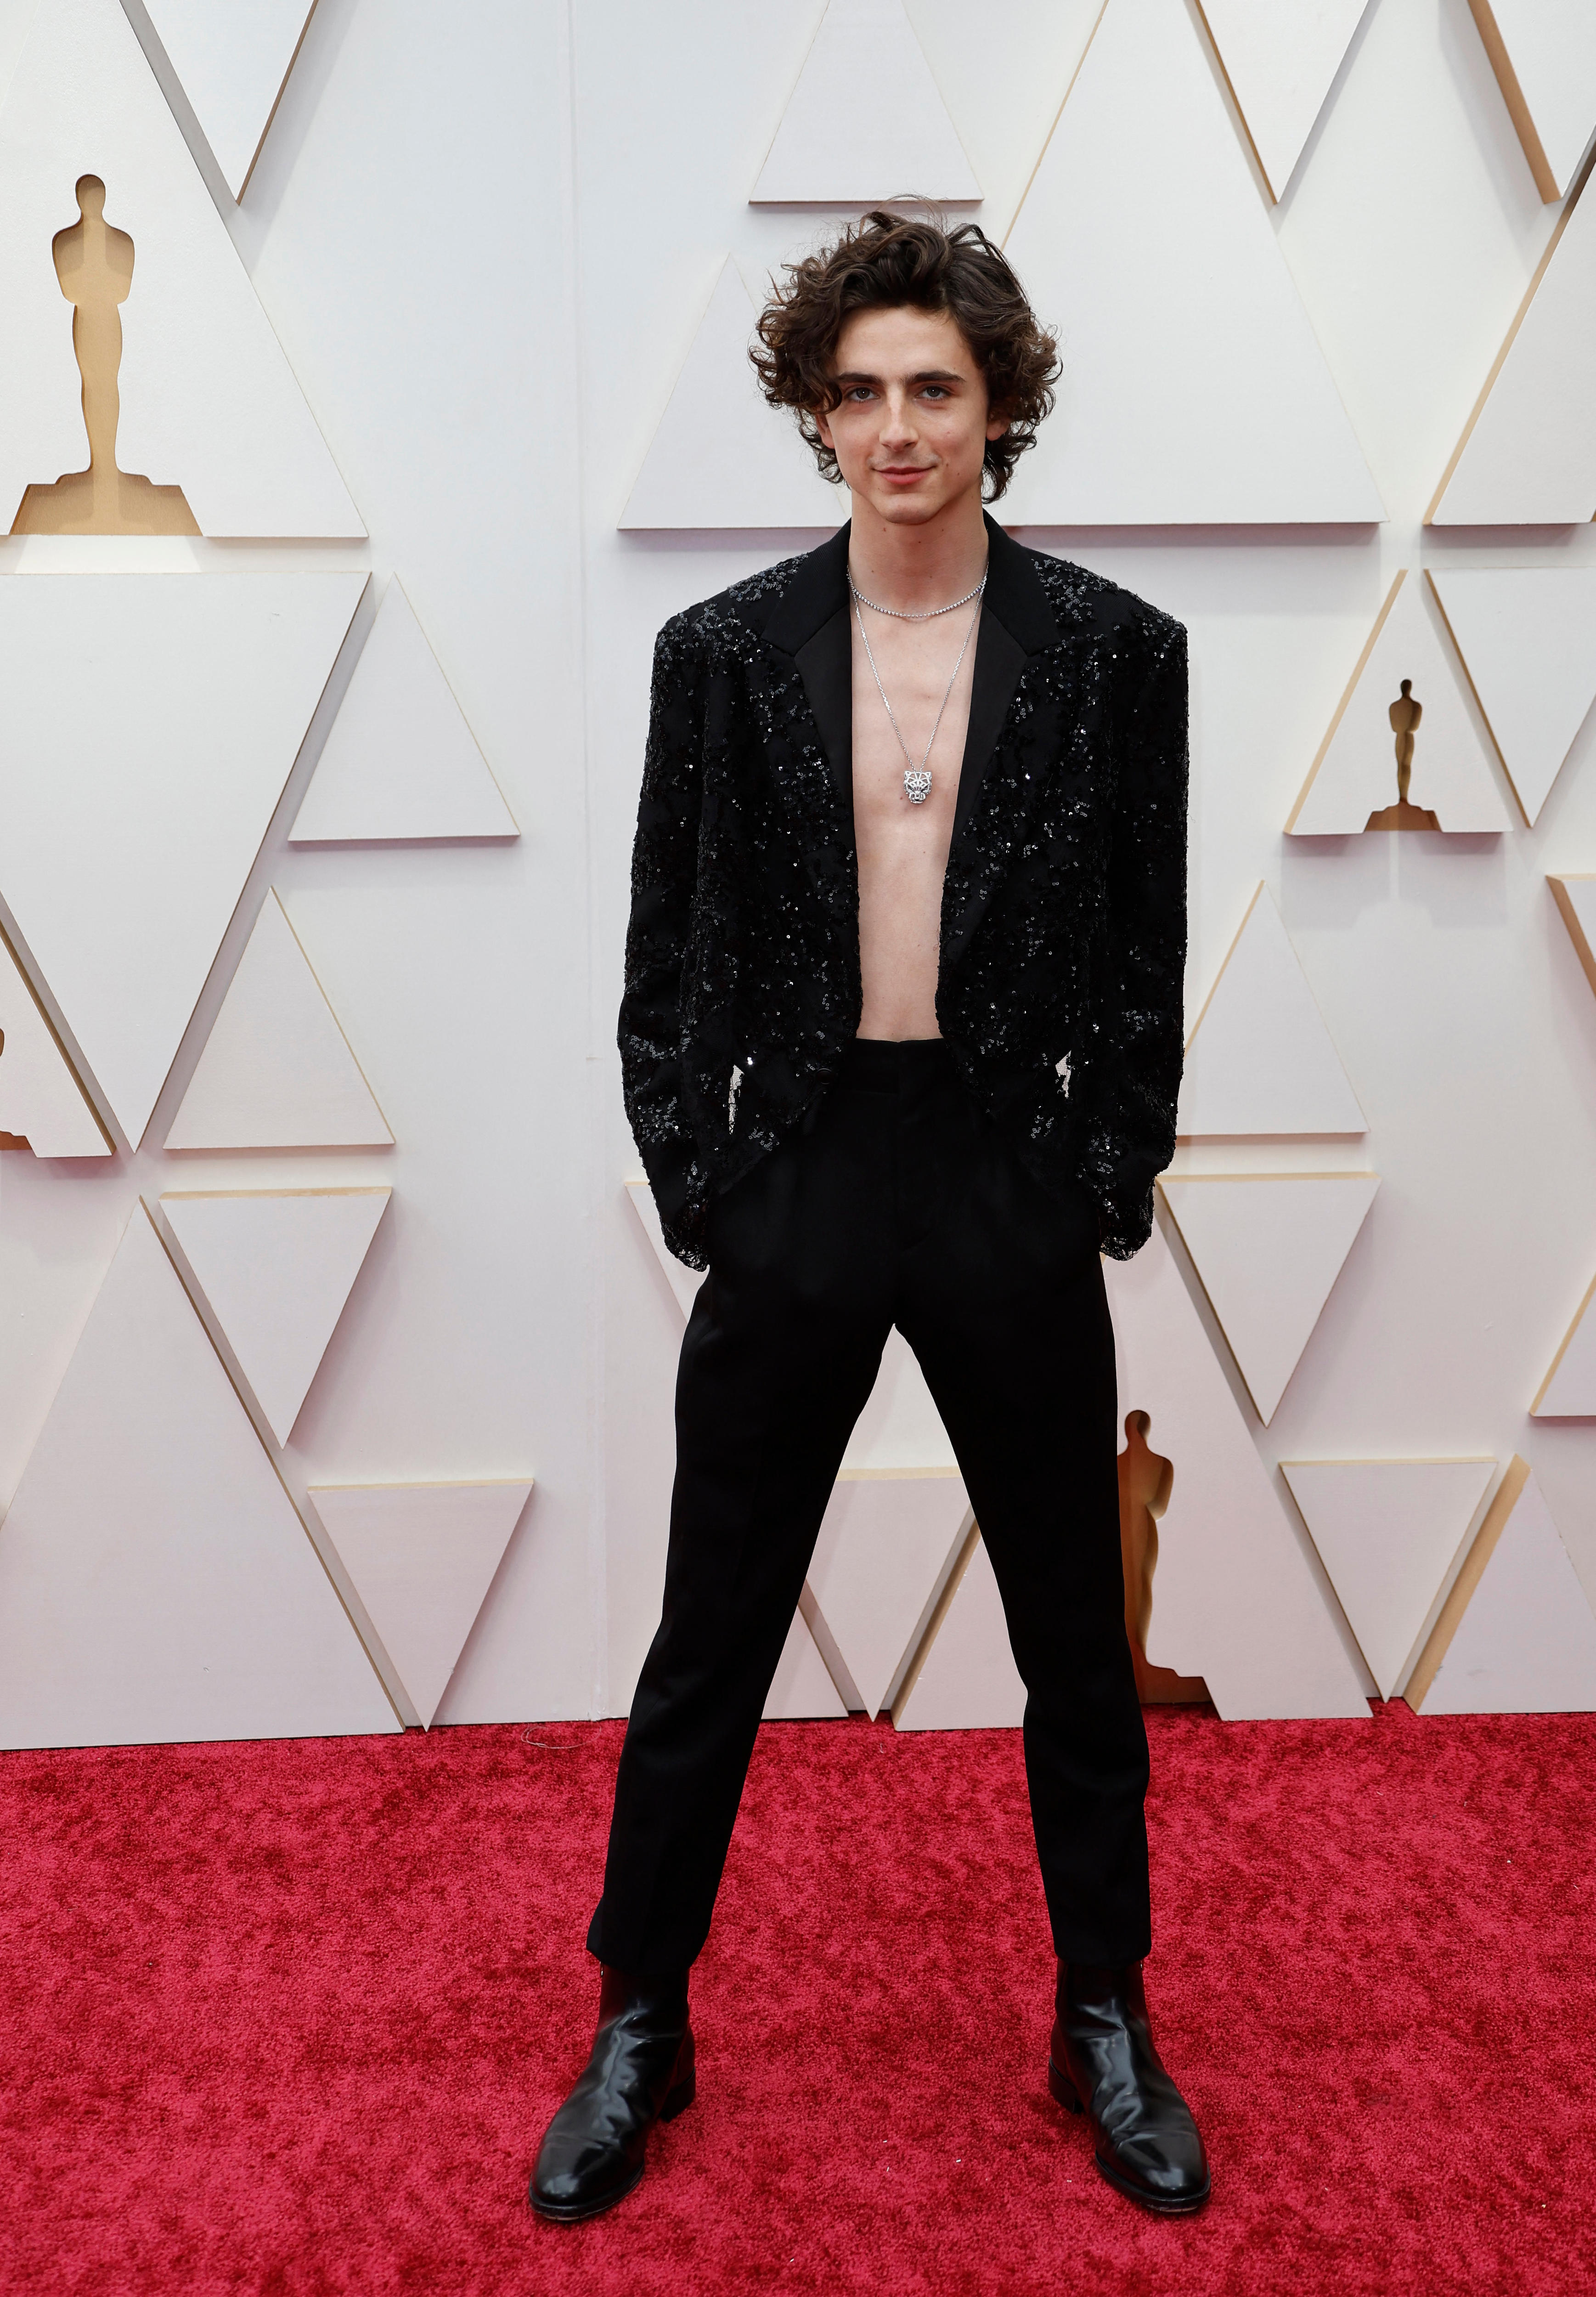 timothee chalamet stands on the red carpet wearing a sequinned black jacket, black pants and no shirt with a statement necklace